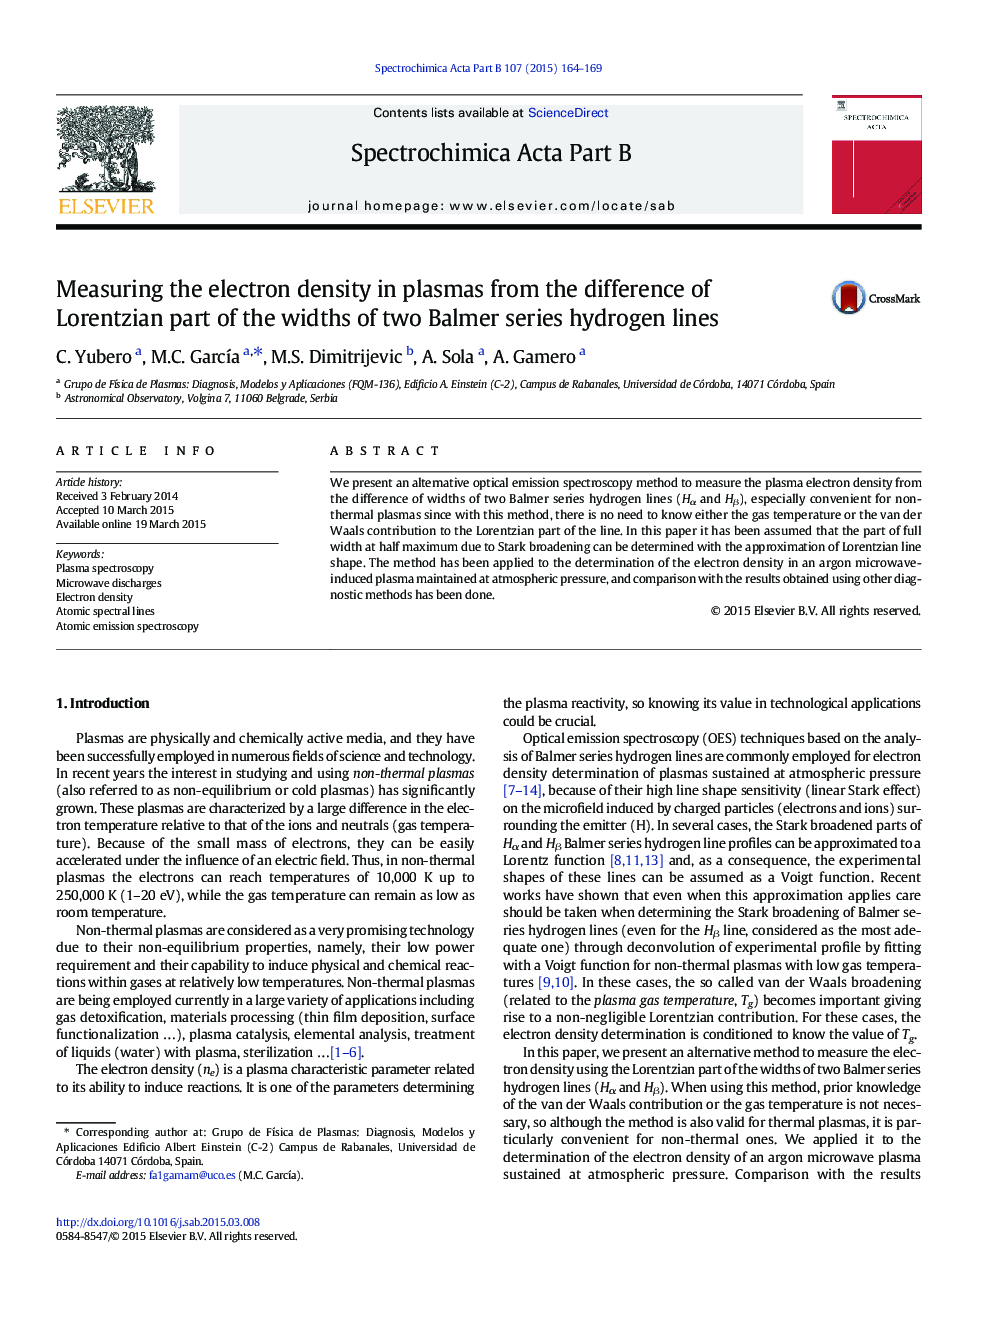 Measuring the electron density in plasmas from the difference of Lorentzian part of the widths of two Balmer series hydrogen lines